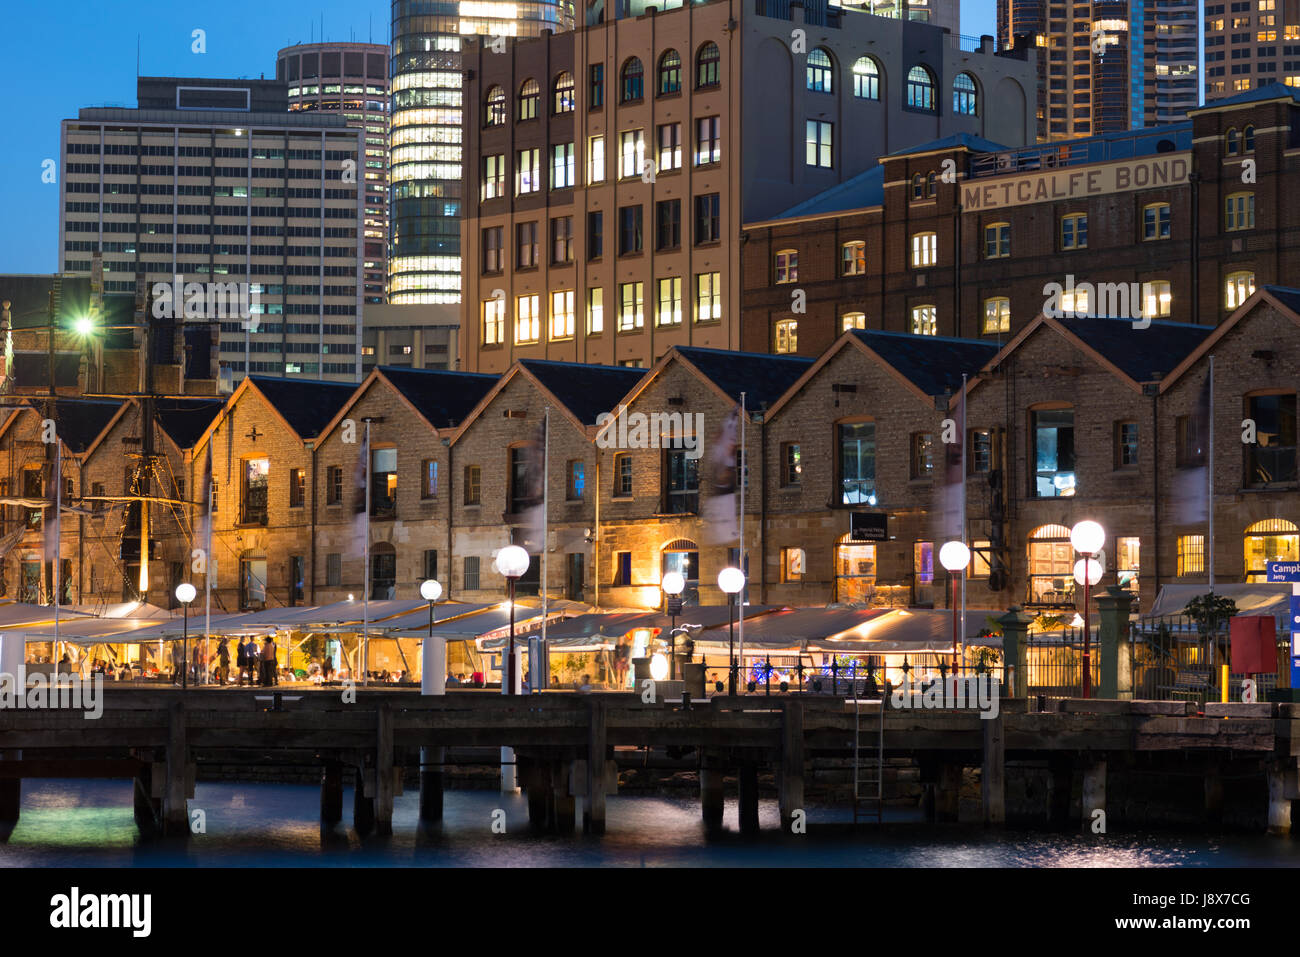 Old warehouses at Campbell's Cove Jetty in Sydney, Australia. Stock Photo